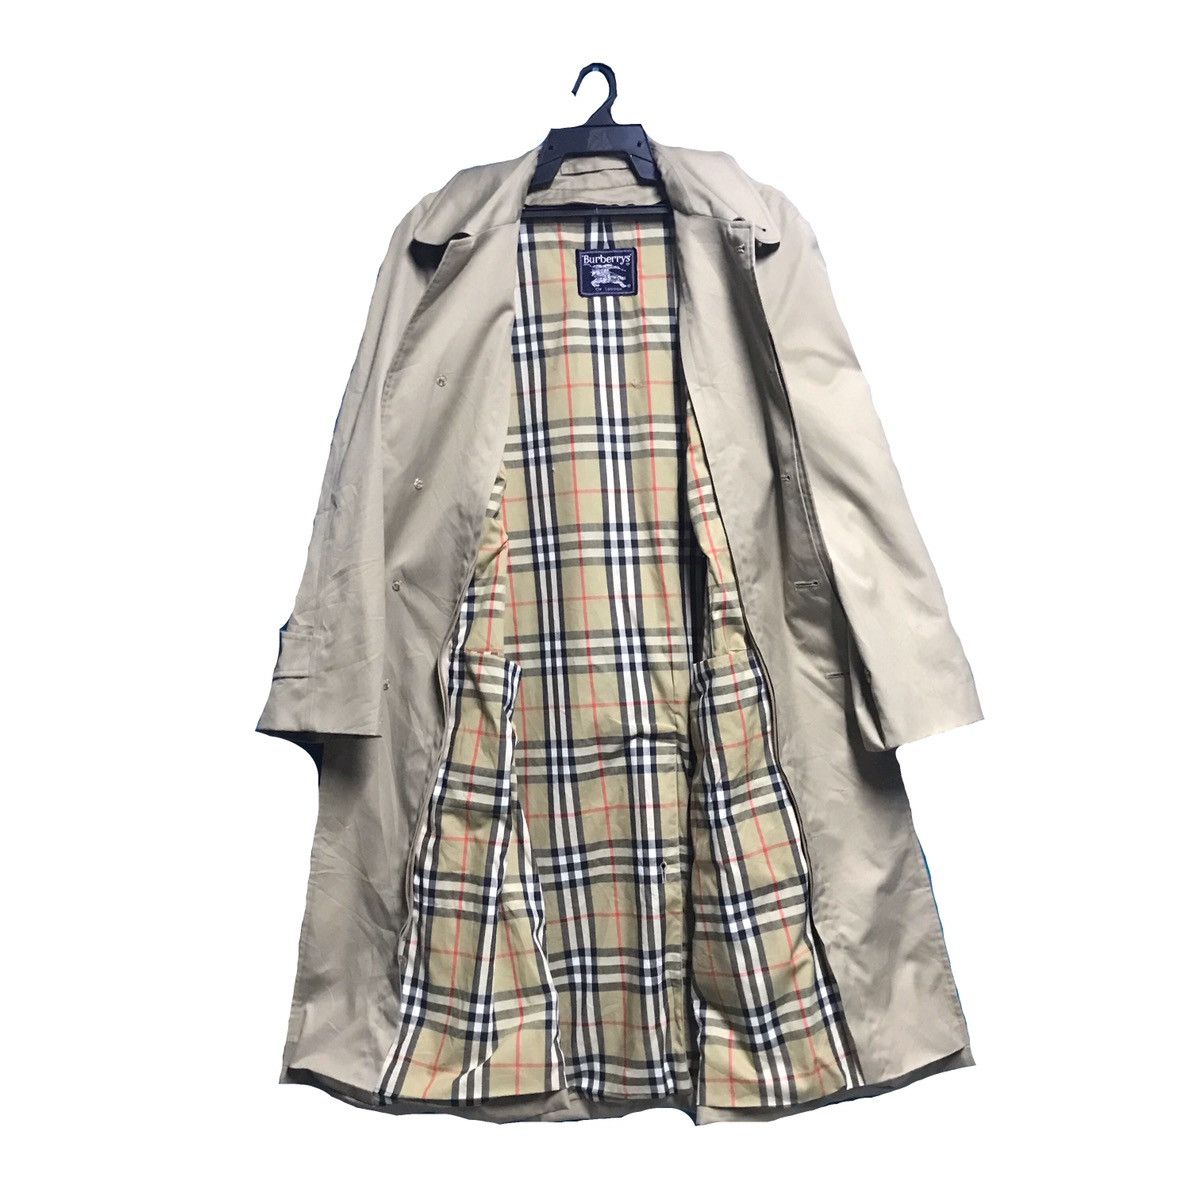 Burberry Prorsum Vintage burberry nova check trench coat with wool lining Size US L / EU 52-54 / 3 - 1 Preview